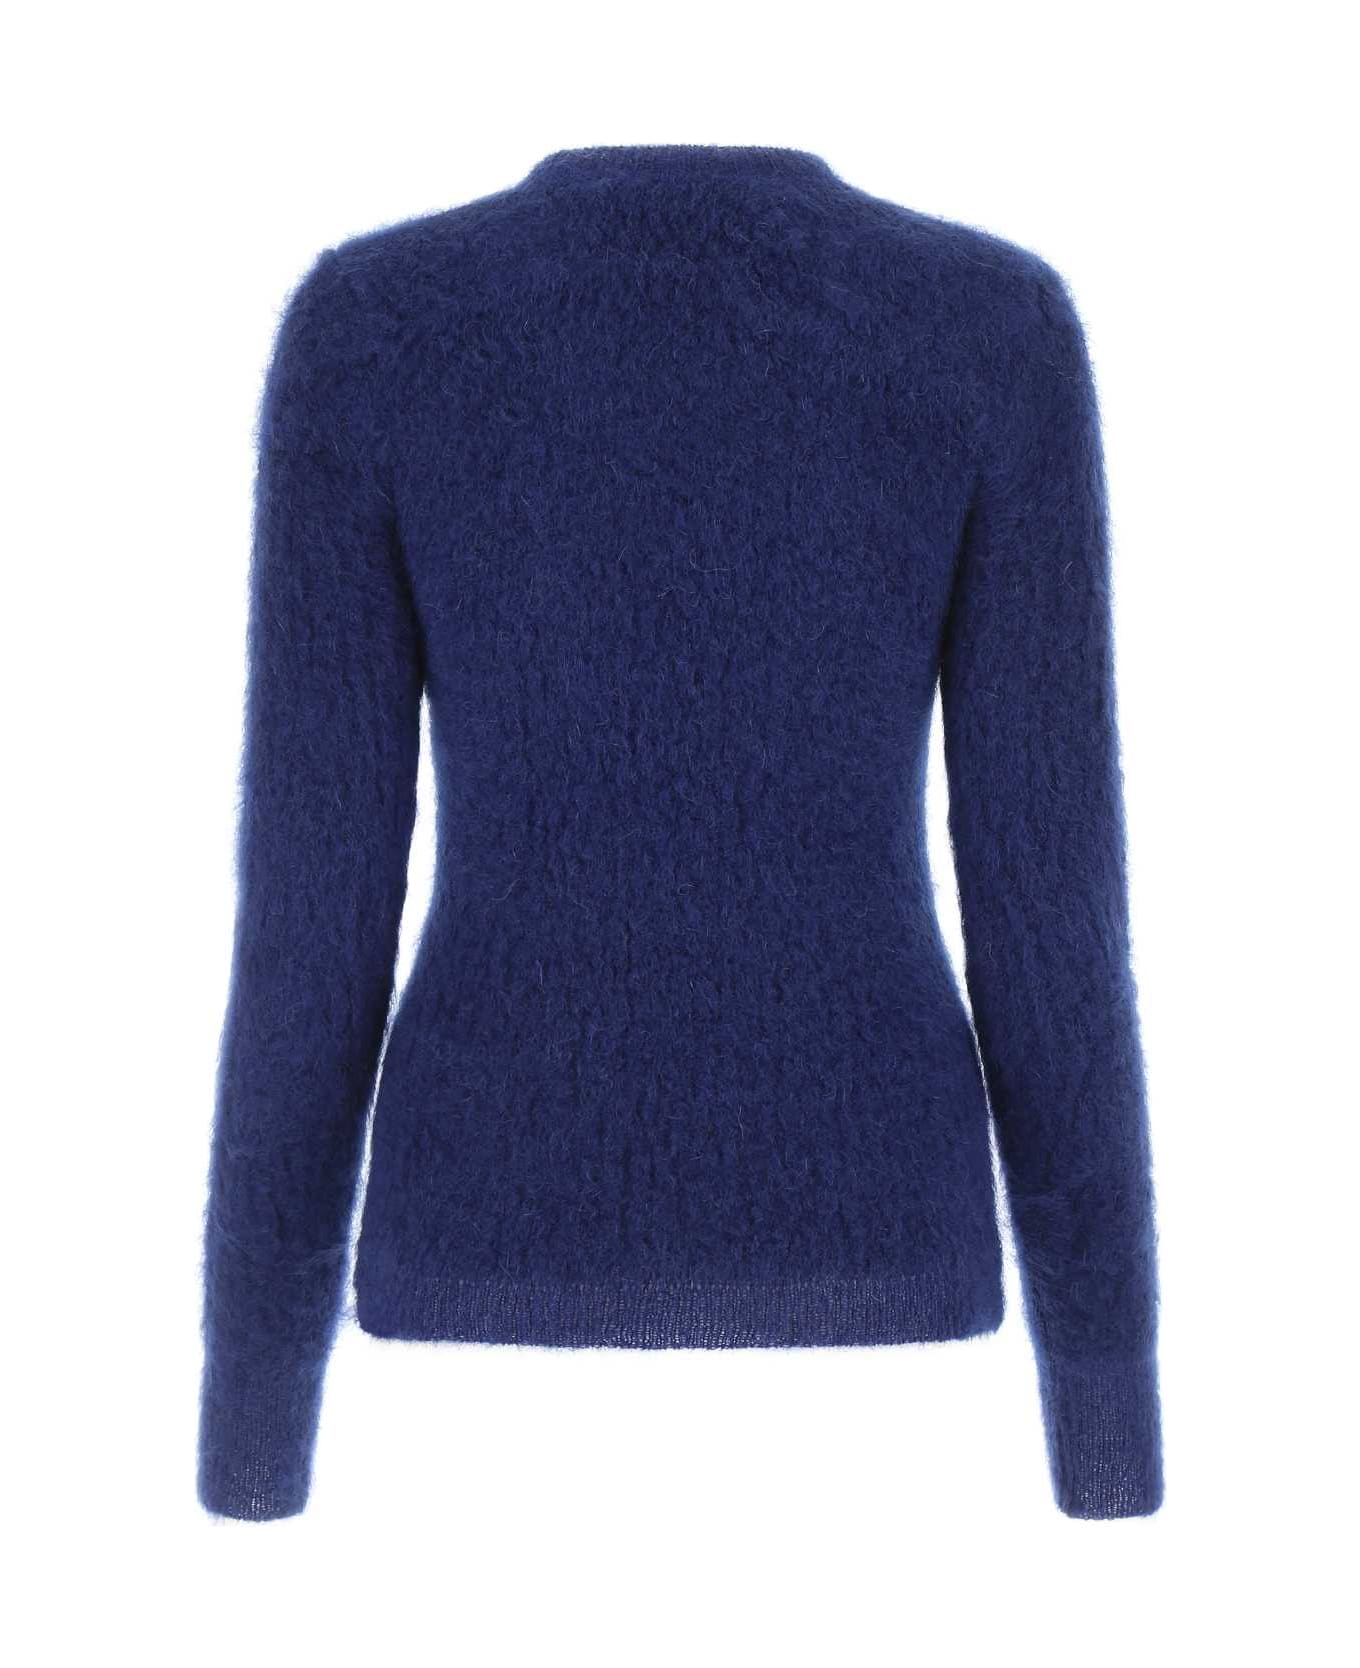 Isabel Marant Blue Mohair Blend Alford Sweater - 30EB